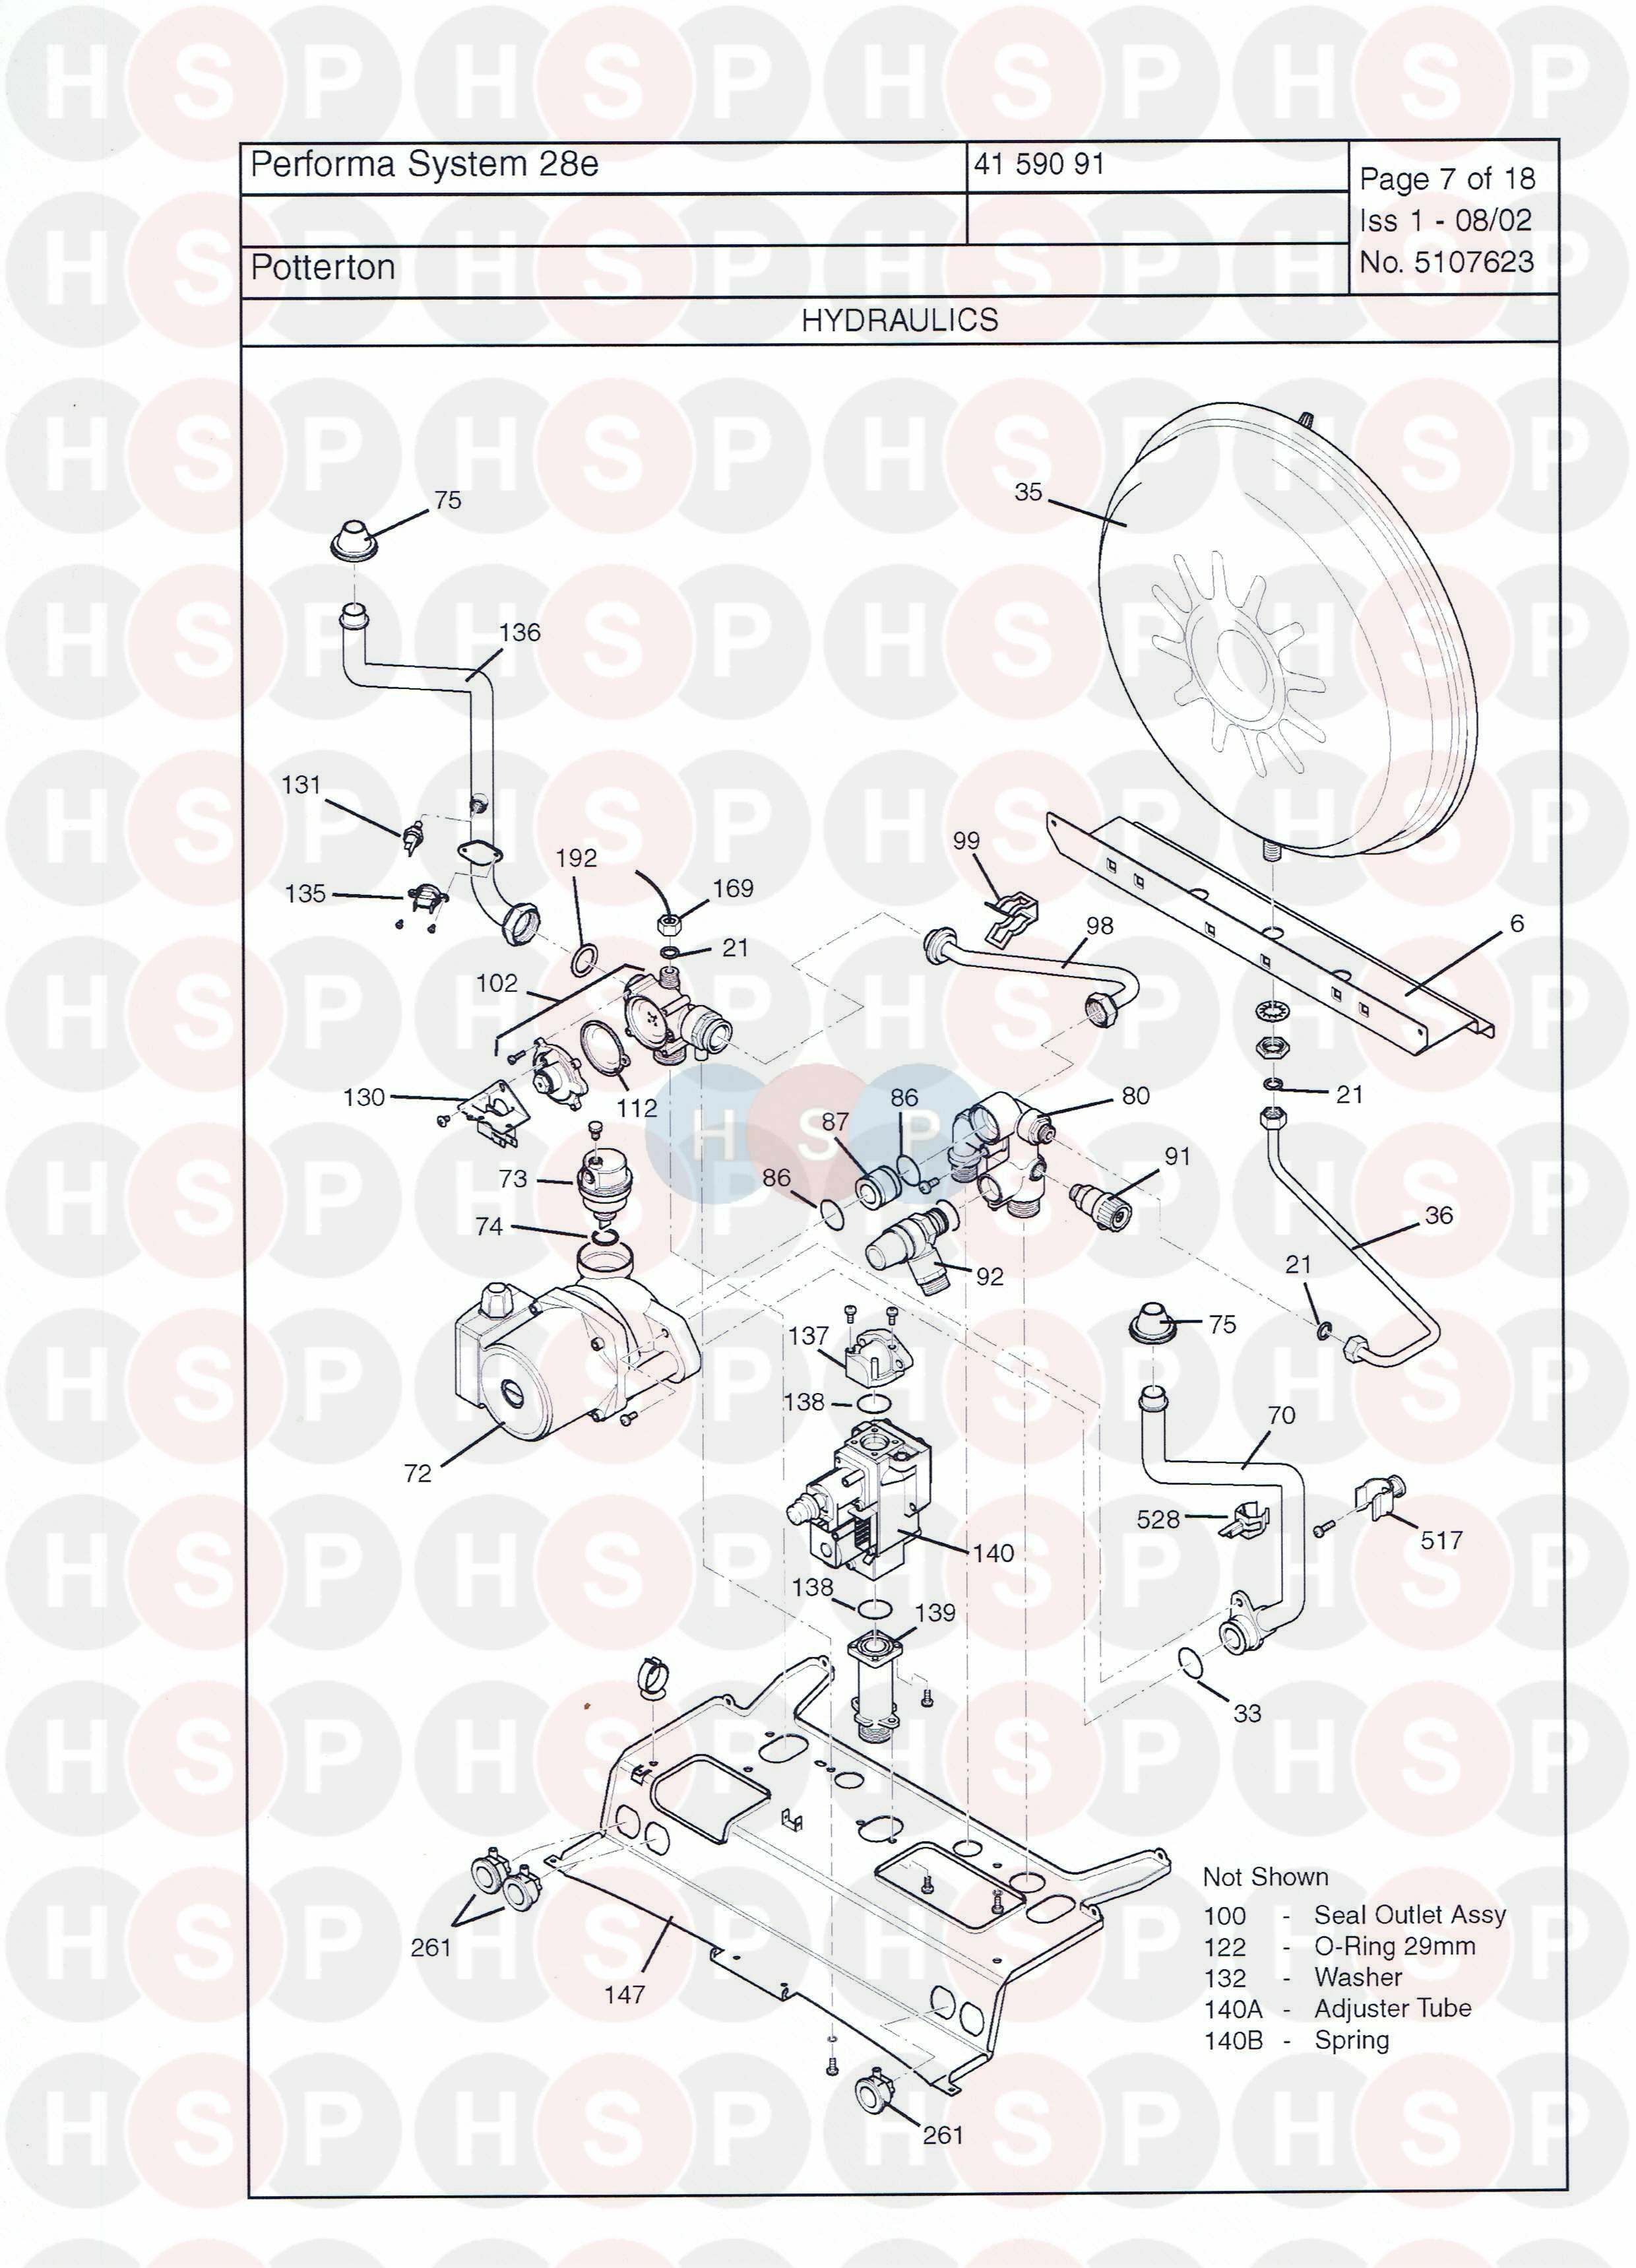 Hydraulics diagram for Potterton Performa System 28e